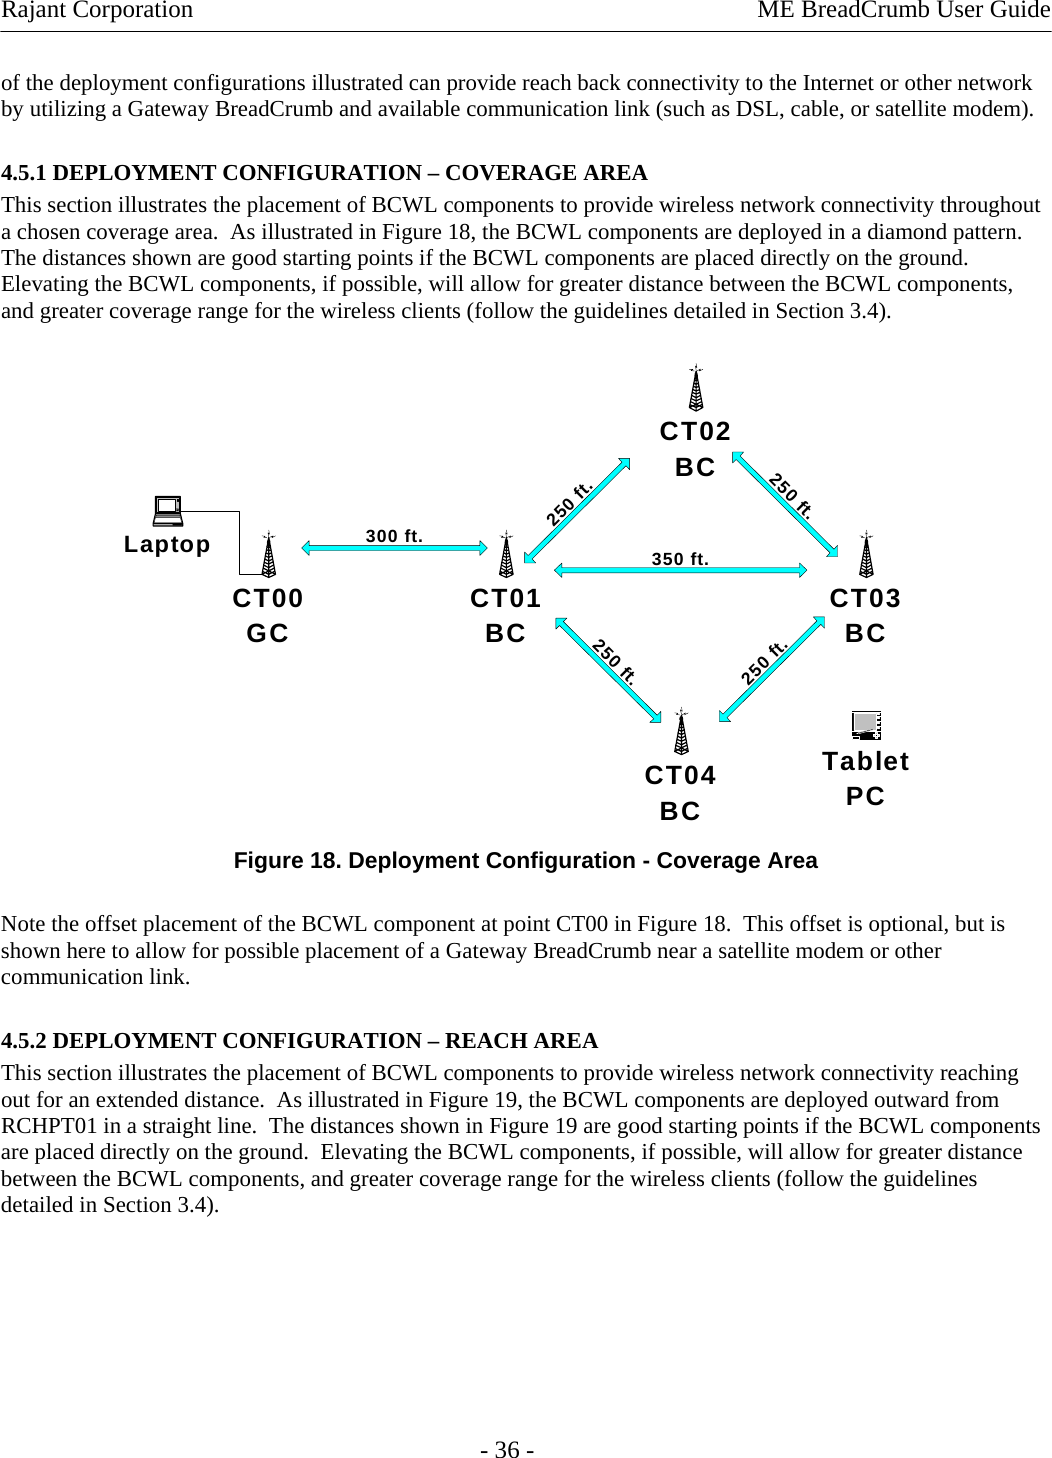 Rajant Corporation    ME BreadCrumb User Guide  of the deployment configurations illustrated can provide reach back connectivity to the Internet or other network by utilizing a Gateway BreadCrumb and available communication link (such as DSL, cable, or satellite modem). 4.5.1 DEPLOYMENT CONFIGURATION – COVERAGE AREA This section illustrates the placement of BCWL components to provide wireless network connectivity throughout a chosen coverage area.  As illustrated in Figure 18, the BCWL components are deployed in a diamond pattern.  The distances shown are good starting points if the BCWL components are placed directly on the ground.  Elevating the BCWL components, if possible, will allow for greater distance between the BCWL components, and greater coverage range for the wireless clients (follow the guidelines detailed in Section 3.4). CT00GCLaptopTabletPCCT01BCCT02BCCT03BCCT04BC350 ft.250 ft.300 ft.250 ft.250 ft.250 ft. Figure 18. Deployment Configuration - Coverage Area Note the offset placement of the BCWL component at point CT00 in Figure 18.  This offset is optional, but is shown here to allow for possible placement of a Gateway BreadCrumb near a satellite modem or other communication link. 4.5.2 DEPLOYMENT CONFIGURATION – REACH AREA This section illustrates the placement of BCWL components to provide wireless network connectivity reaching out for an extended distance.  As illustrated in Figure 19, the BCWL components are deployed outward from RCHPT01 in a straight line.  The distances shown in Figure 19 are good starting points if the BCWL components are placed directly on the ground.  Elevating the BCWL components, if possible, will allow for greater distance between the BCWL components, and greater coverage range for the wireless clients (follow the guidelines detailed in Section 3.4).  - 36 - 